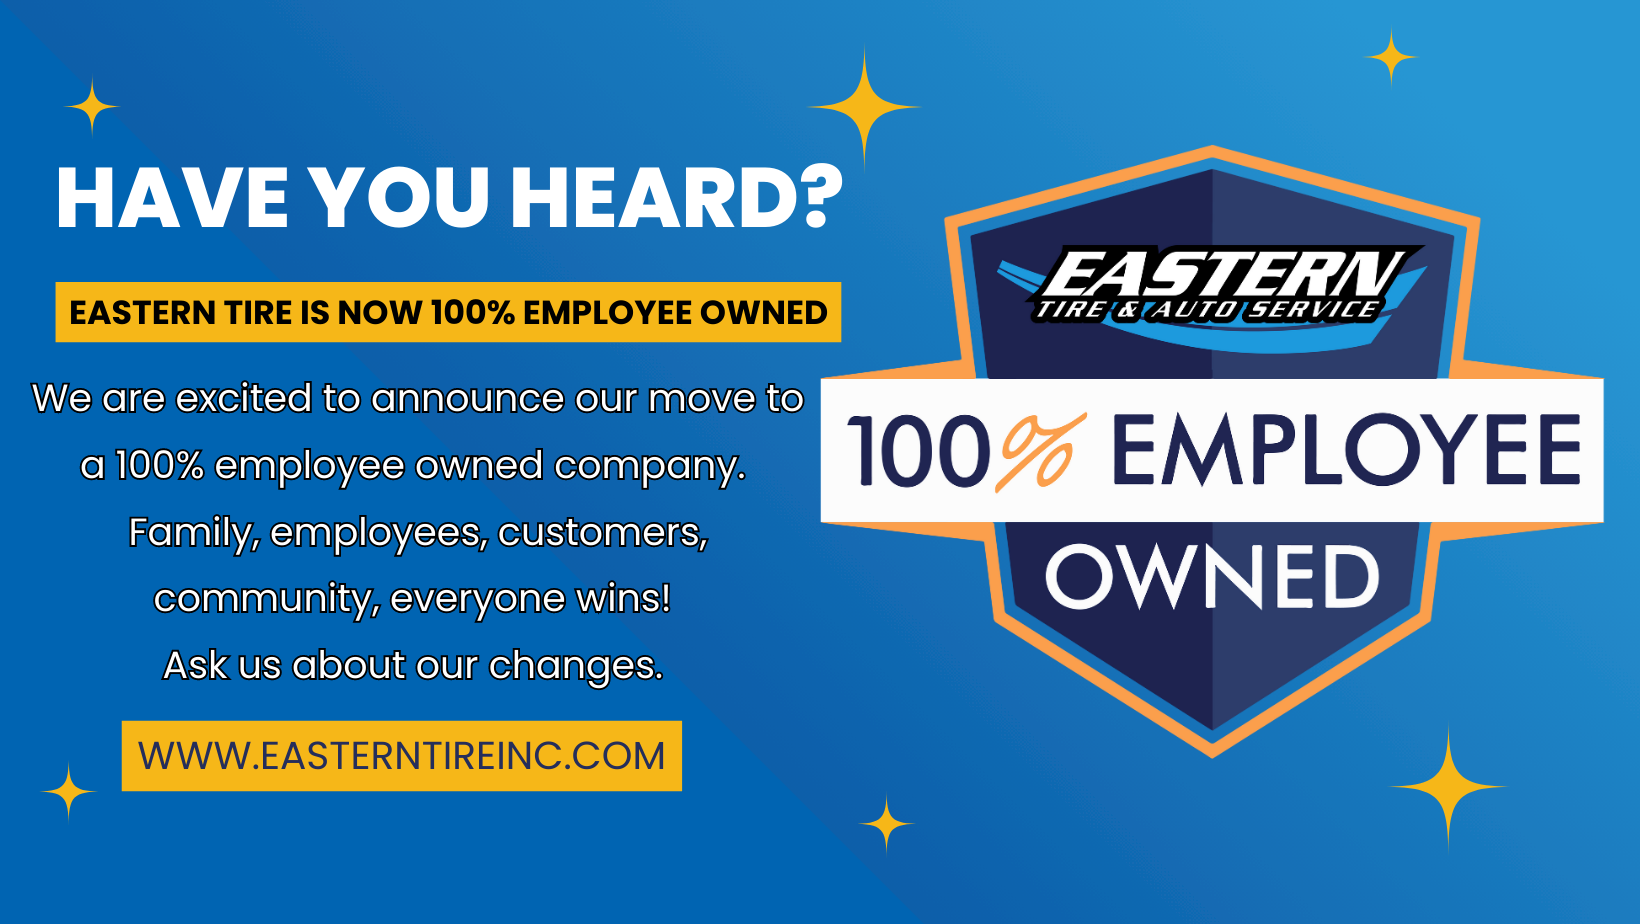 We are now 100% Employee Owned